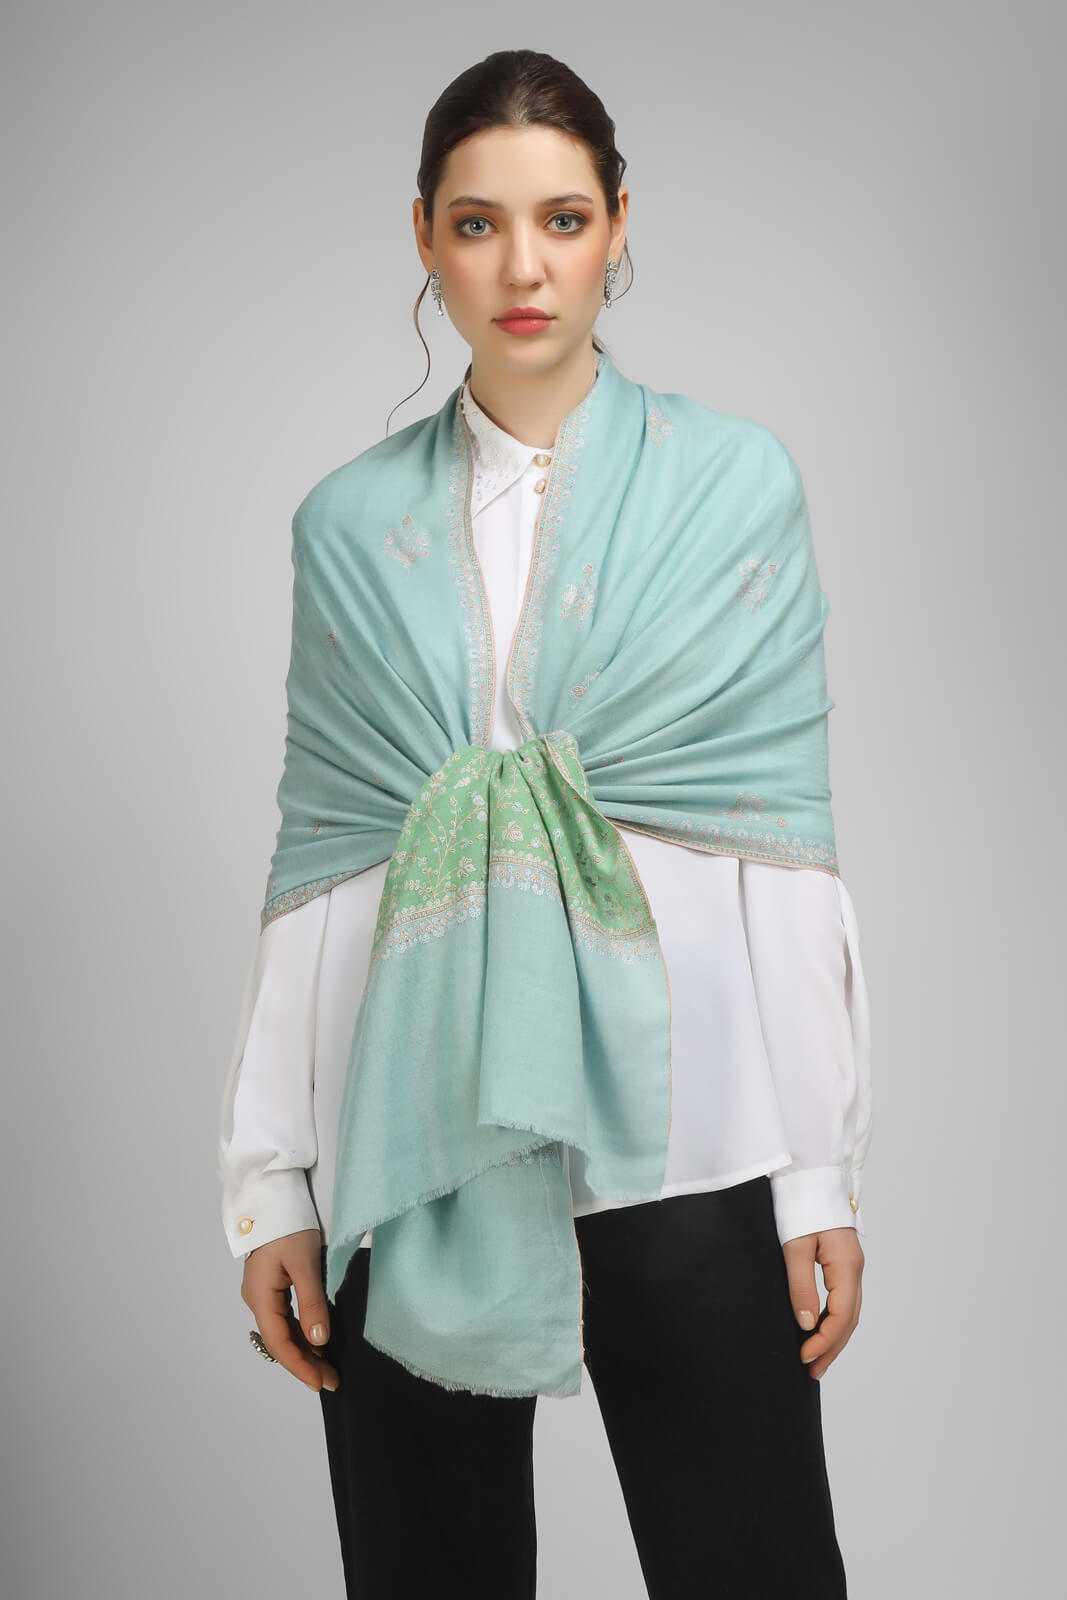 PASHMINA EMBROIDERY STOLE - Light Turquoise Pashmina Paladaar stole - We deliver exquisite products to your doorstep in the United States